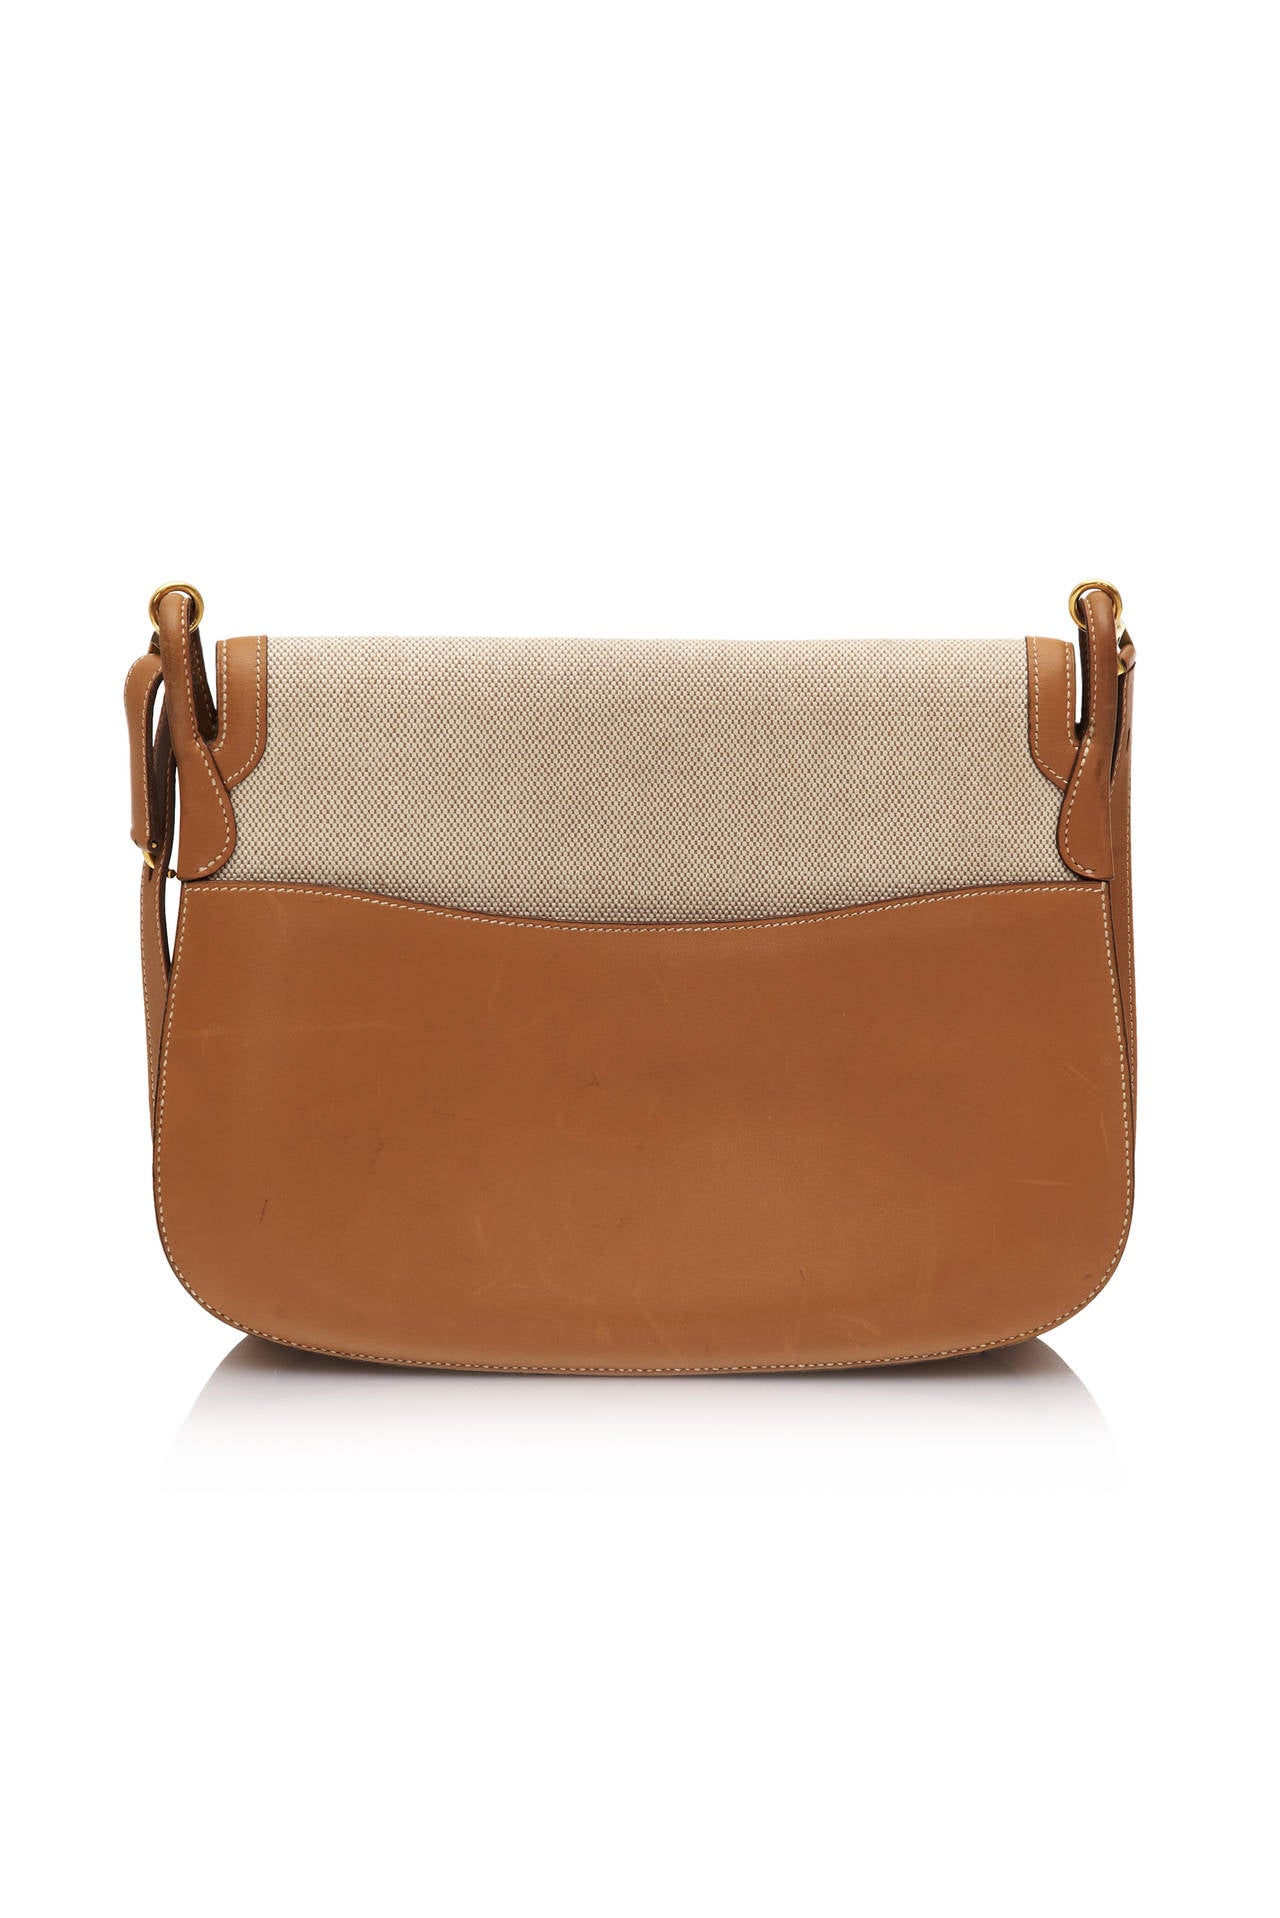 Beautiful handbag by Hermes with beige linen body, pale brown leather strap and details and gold tone metal clasp to fasten.  It features a pocket at the back in brown leather and three interior pockets, one with zip fastening.  A very collectable